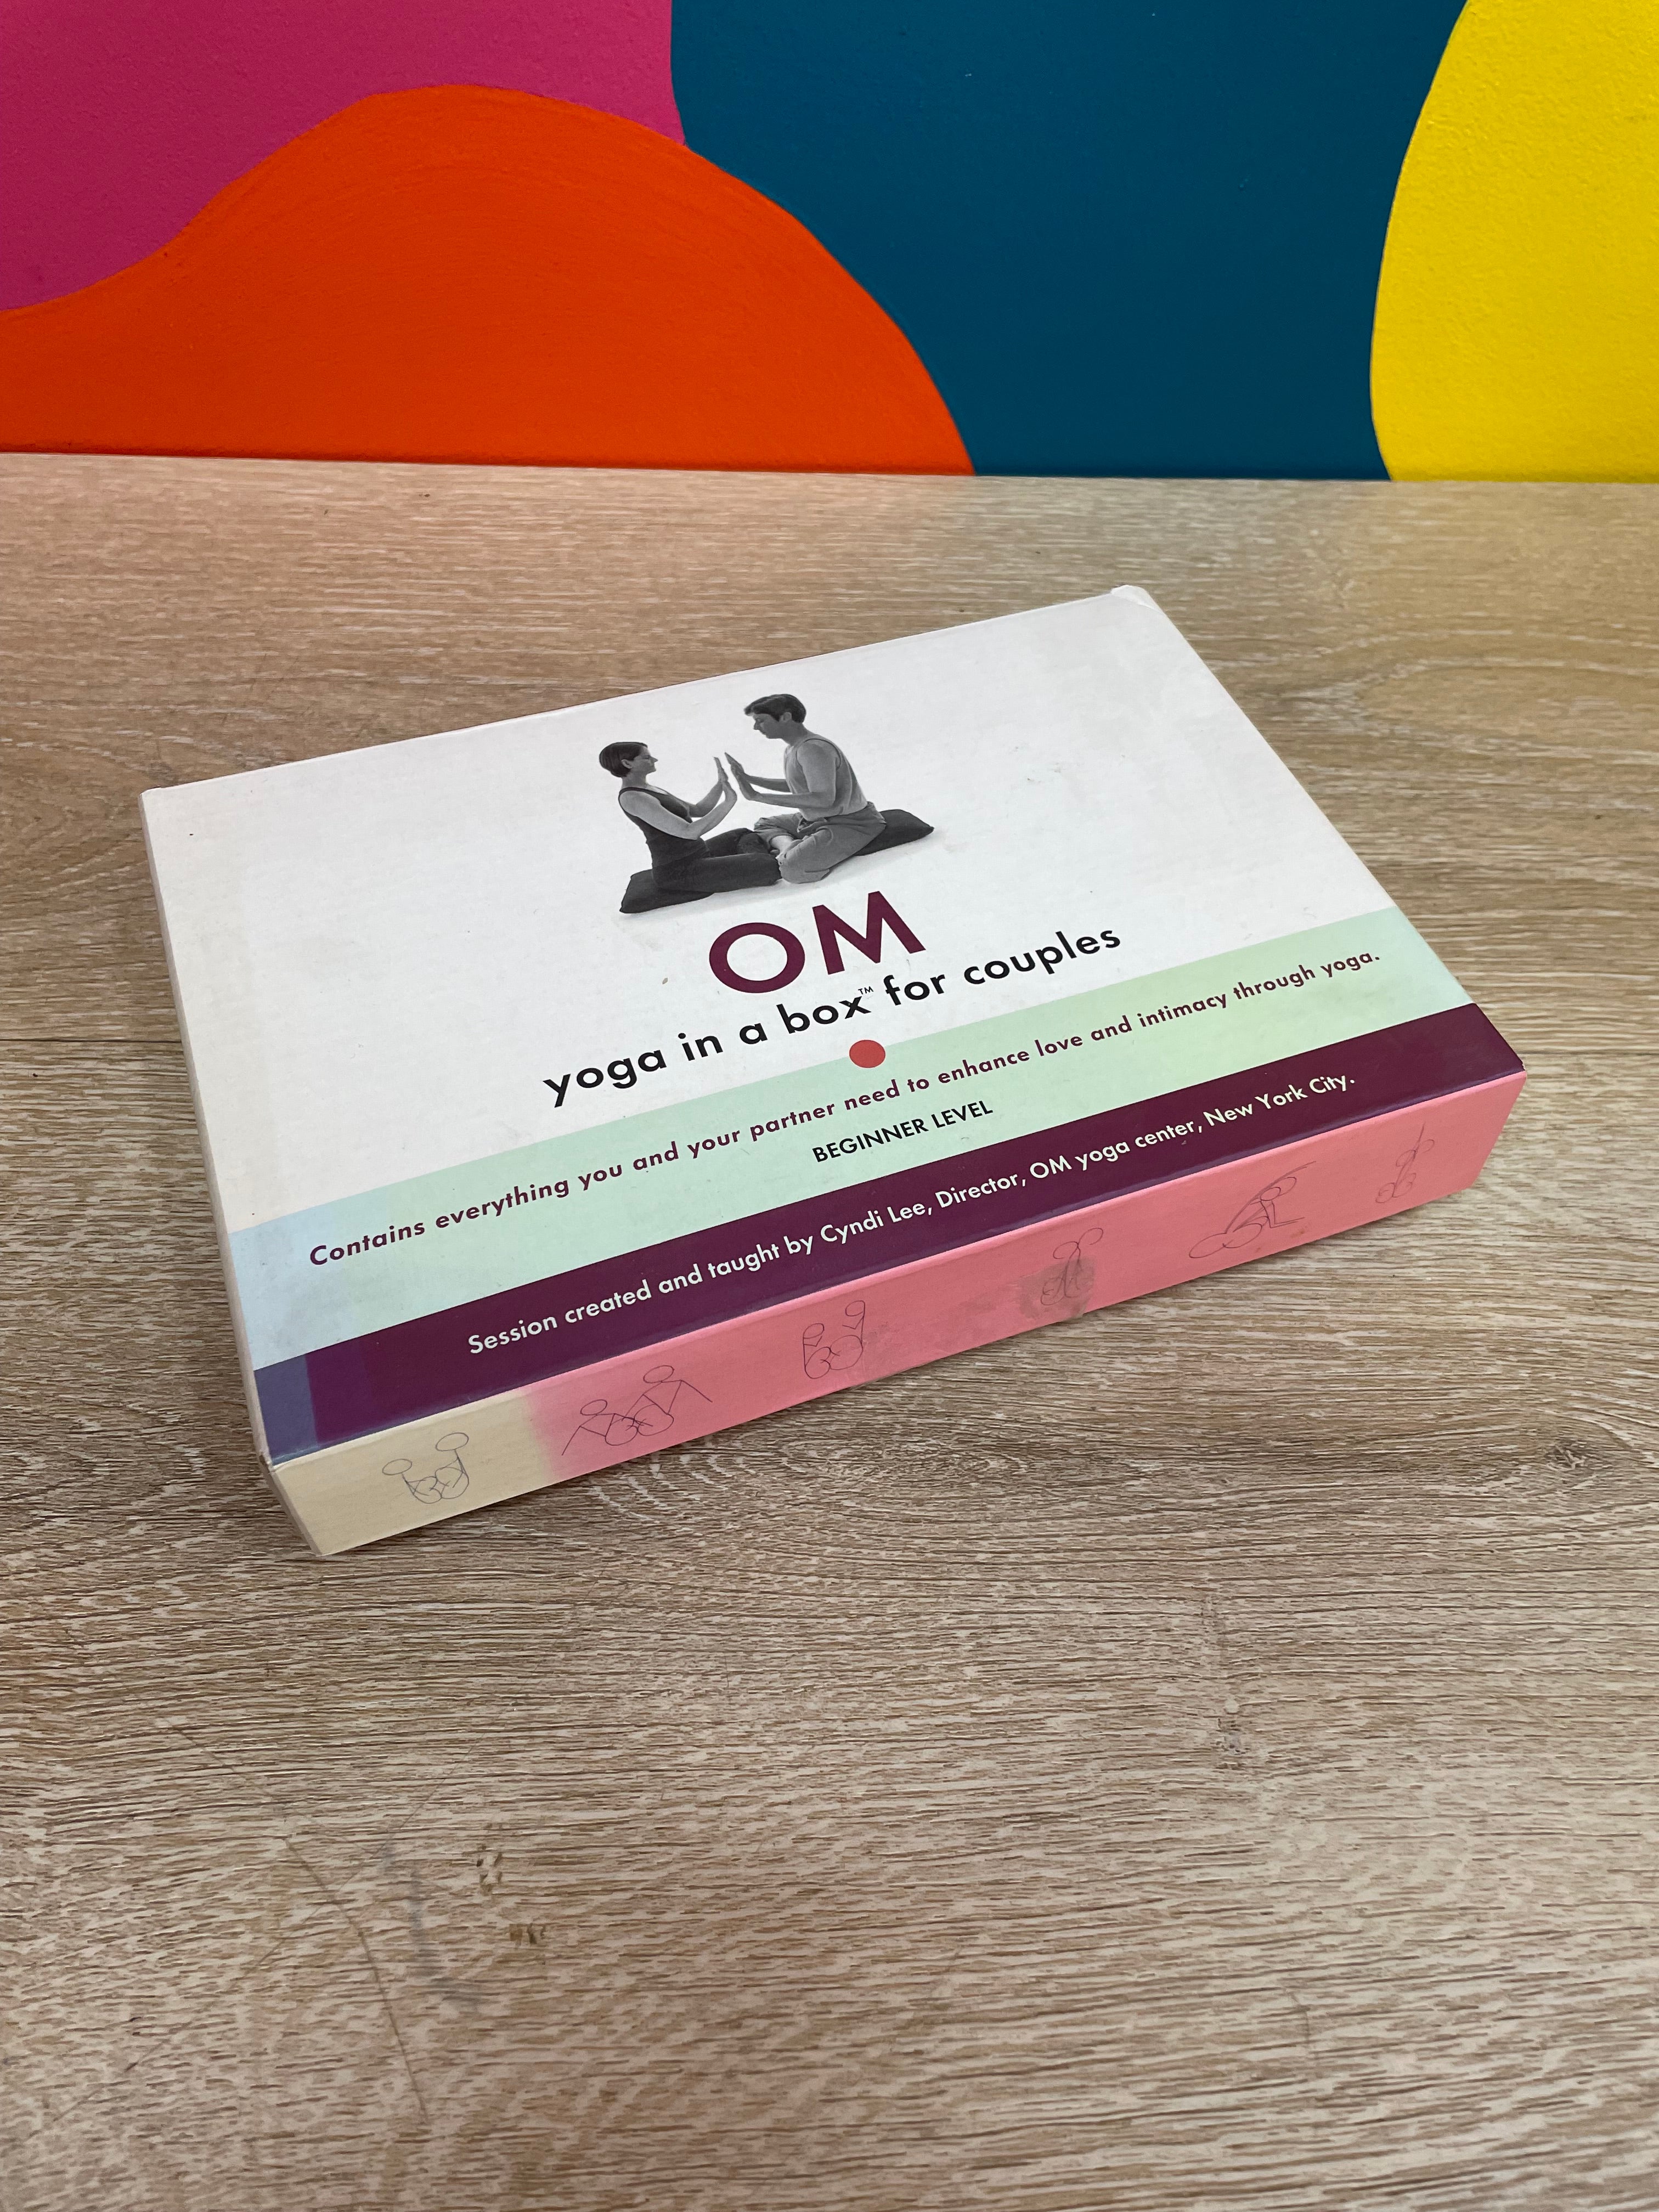 OM: Yoga in a Box for Couples